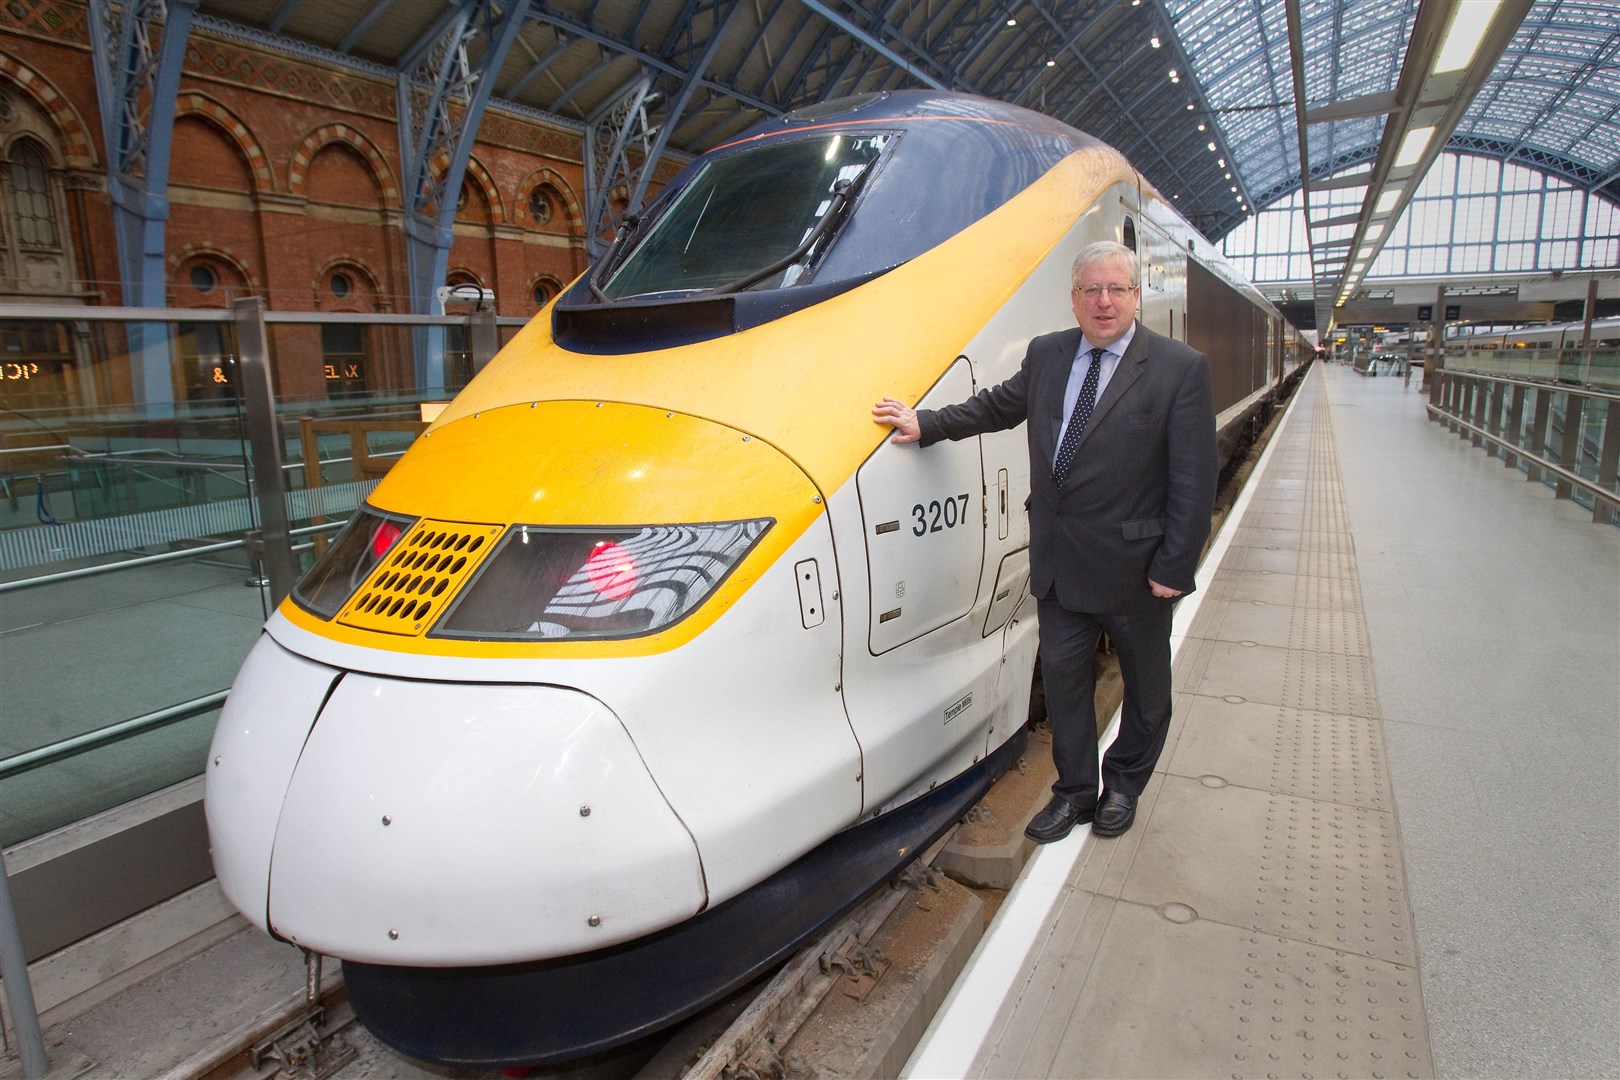 Patrick McLoughlin at St Pancras during his spell as transport secretary (Philip Toscano/PA)